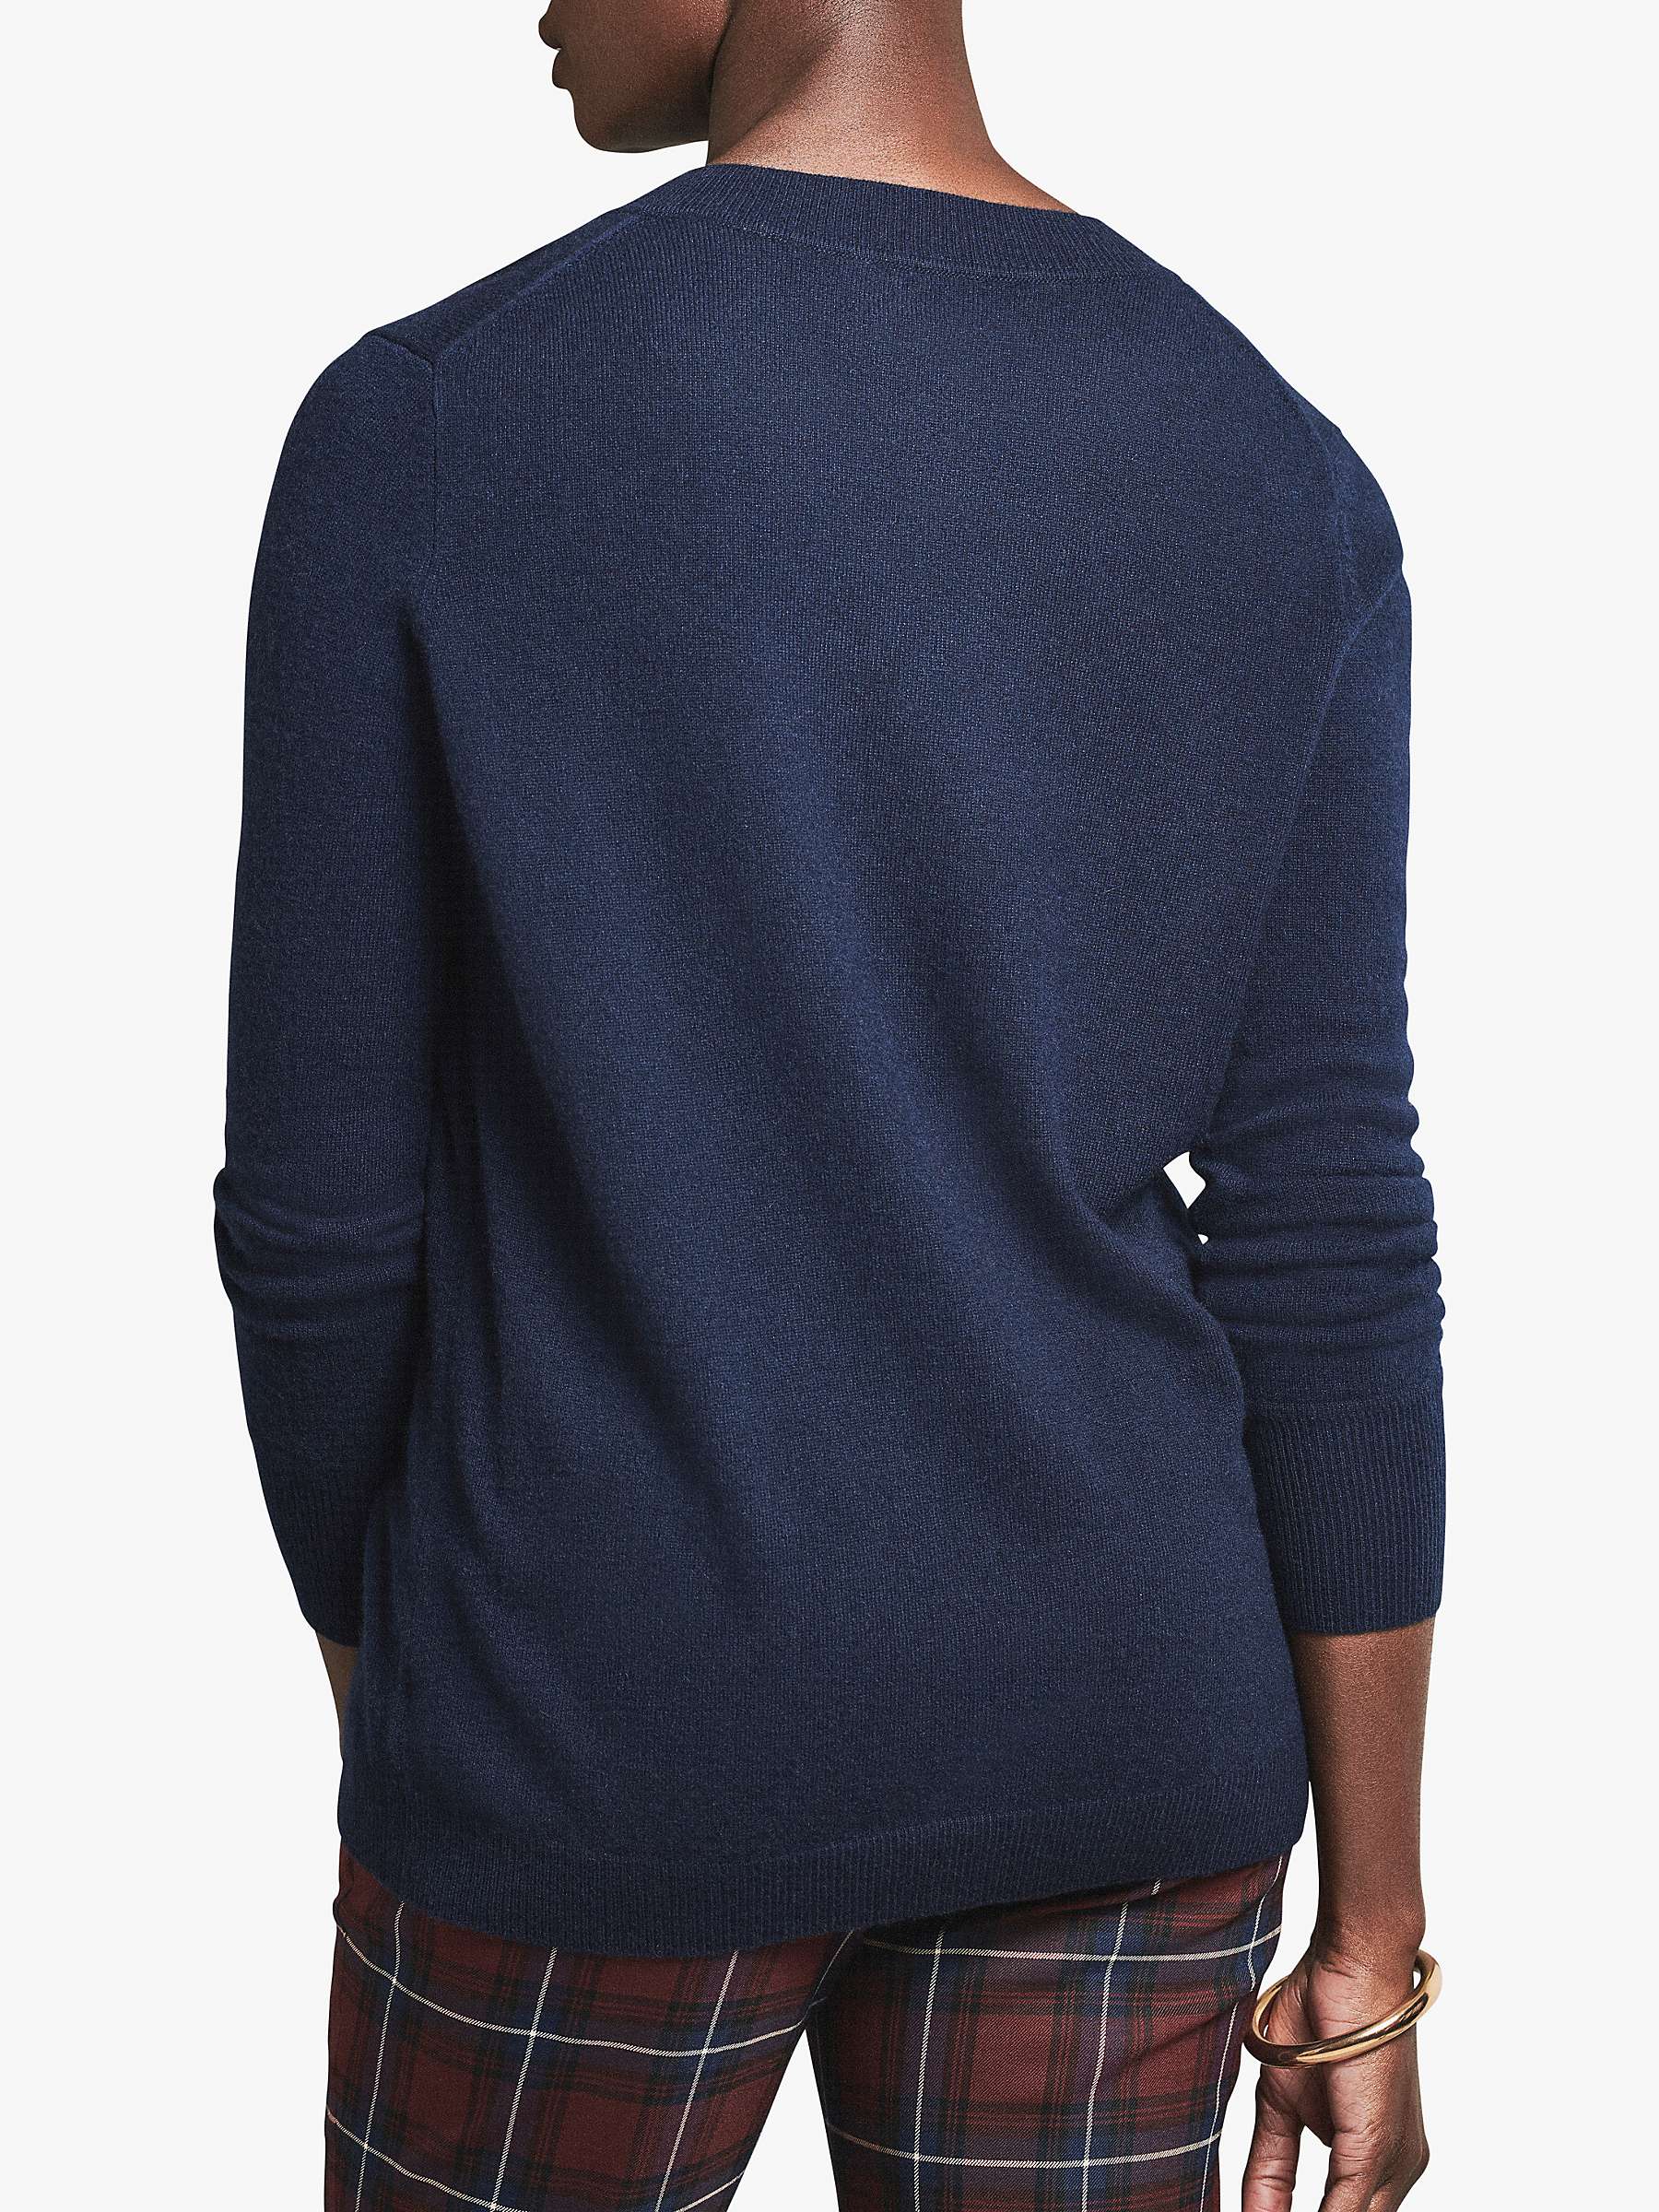 Buy Pure Collection Cashmere Boyfriend Sweater Online at johnlewis.com